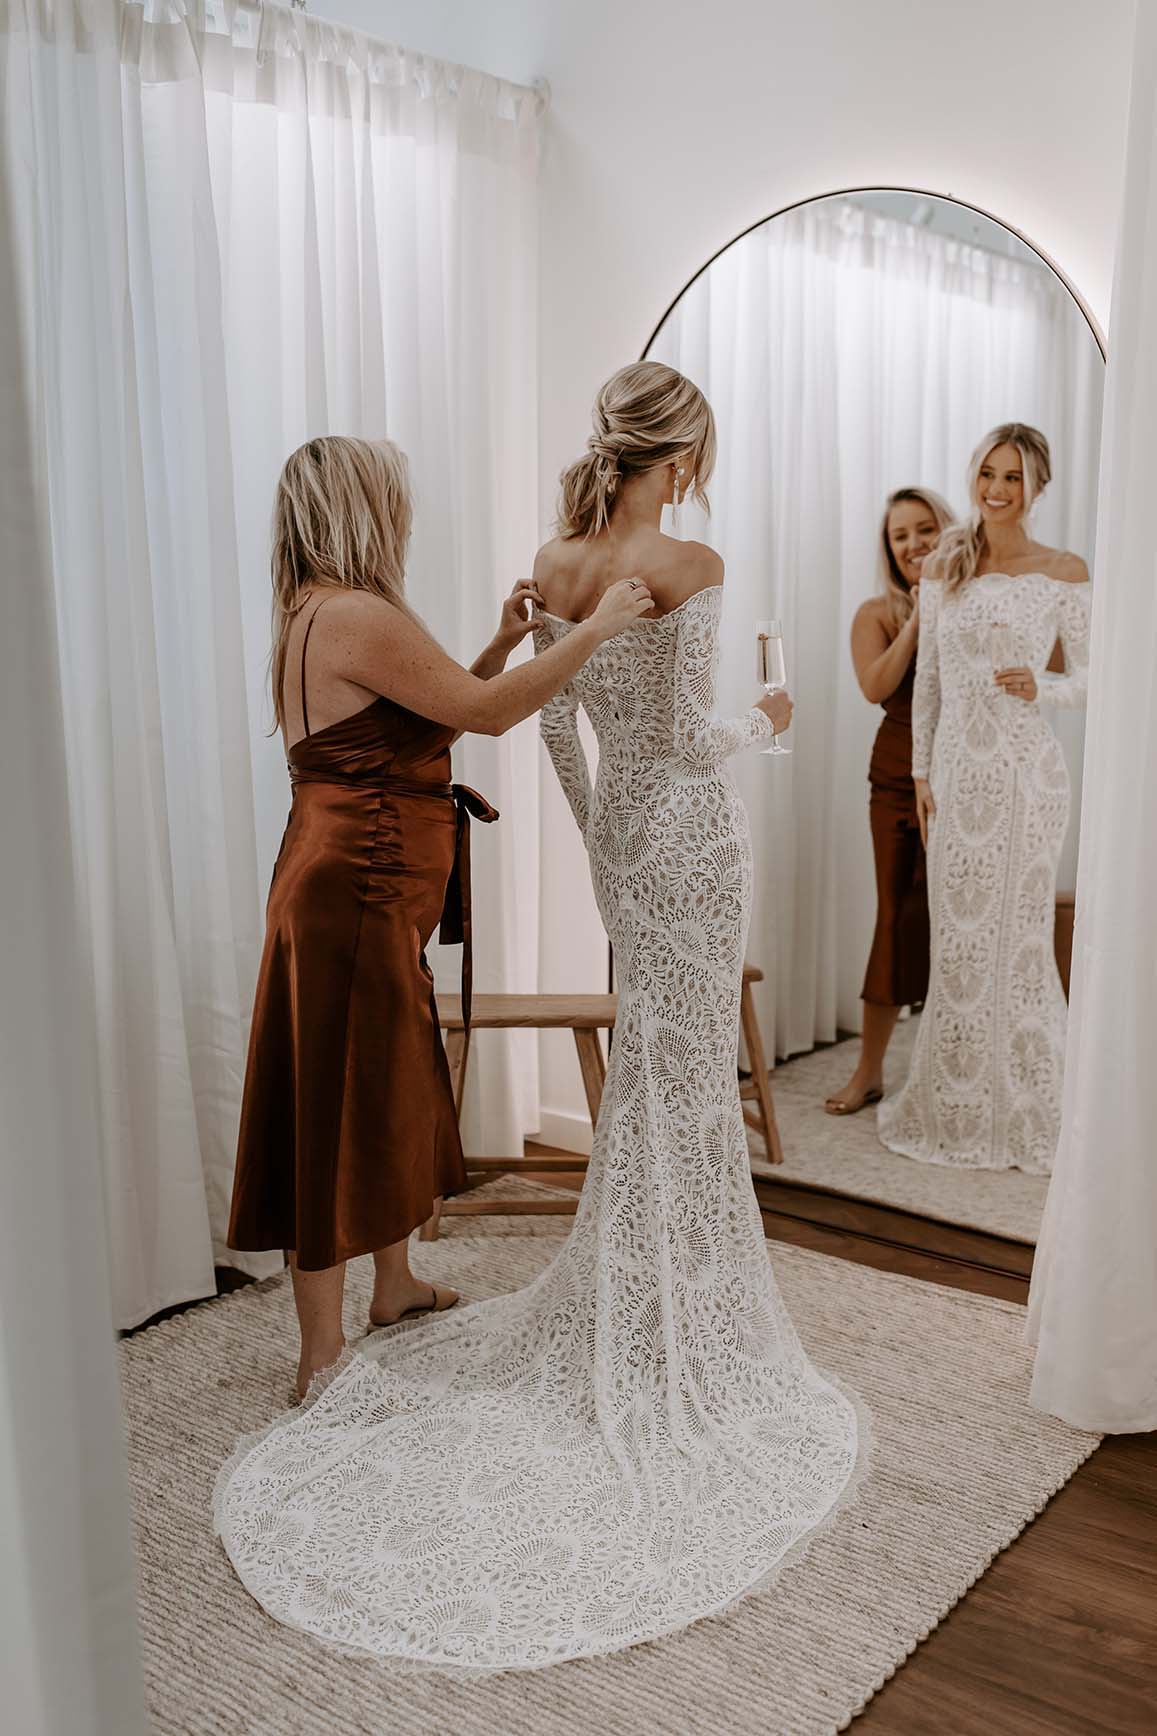 Bride holding champagne with stylist in bridal showroom